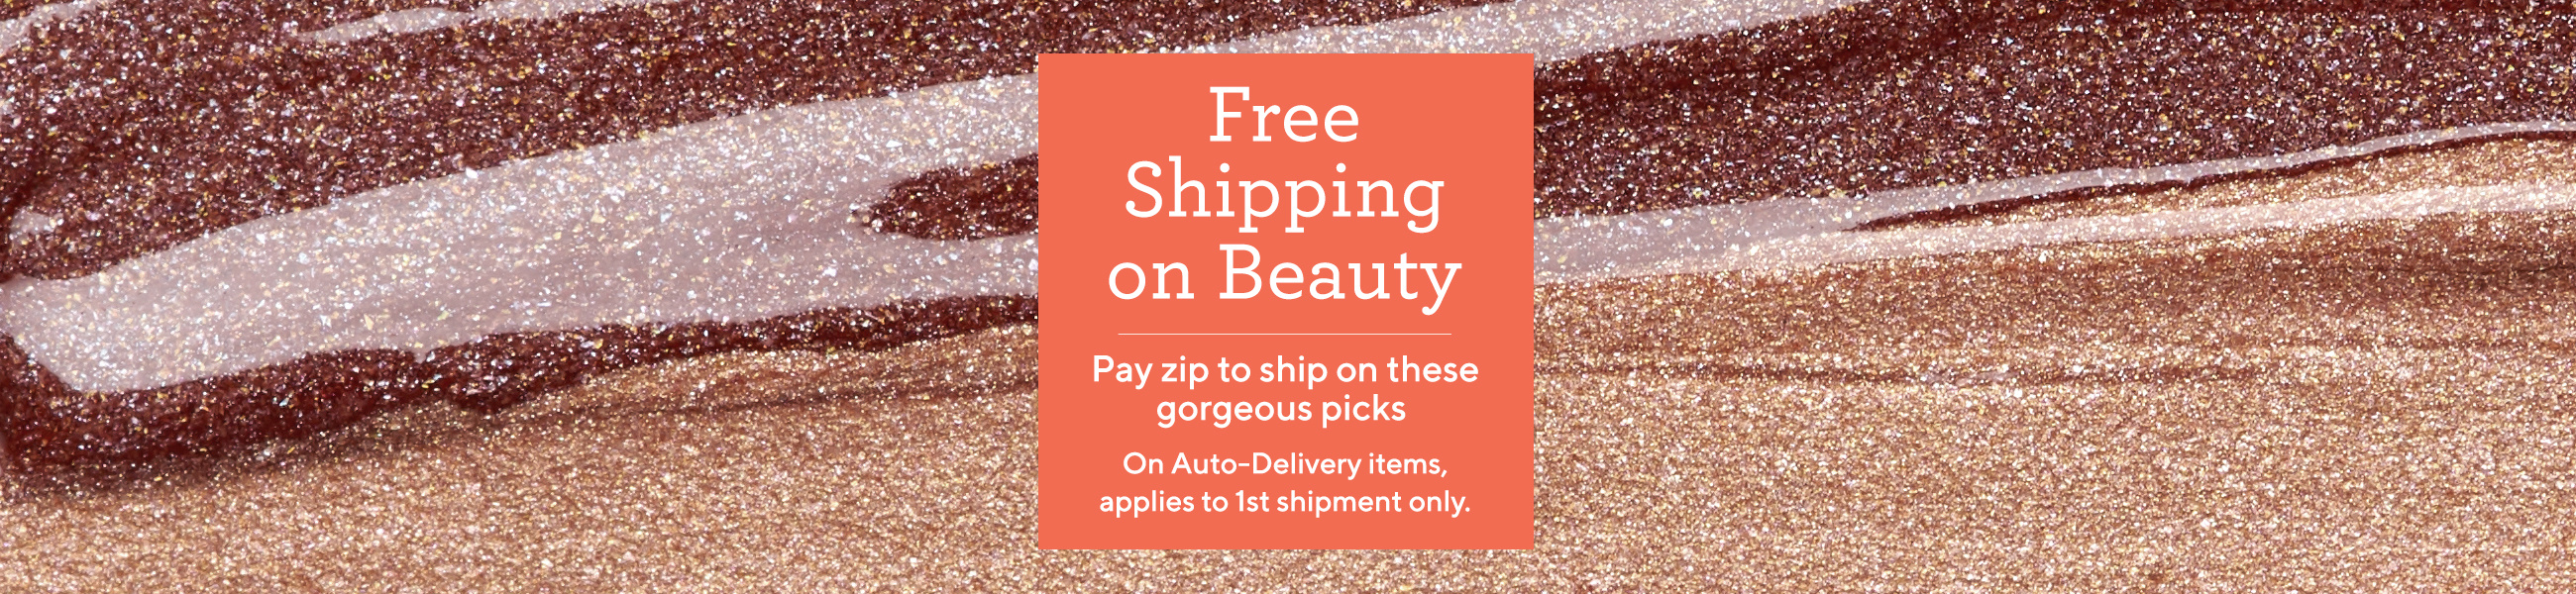 Free Shipping on Beauty. Pay zip to ship on these gorgeous picks. On Auto-Delivery items, applies to 1st shipment only.